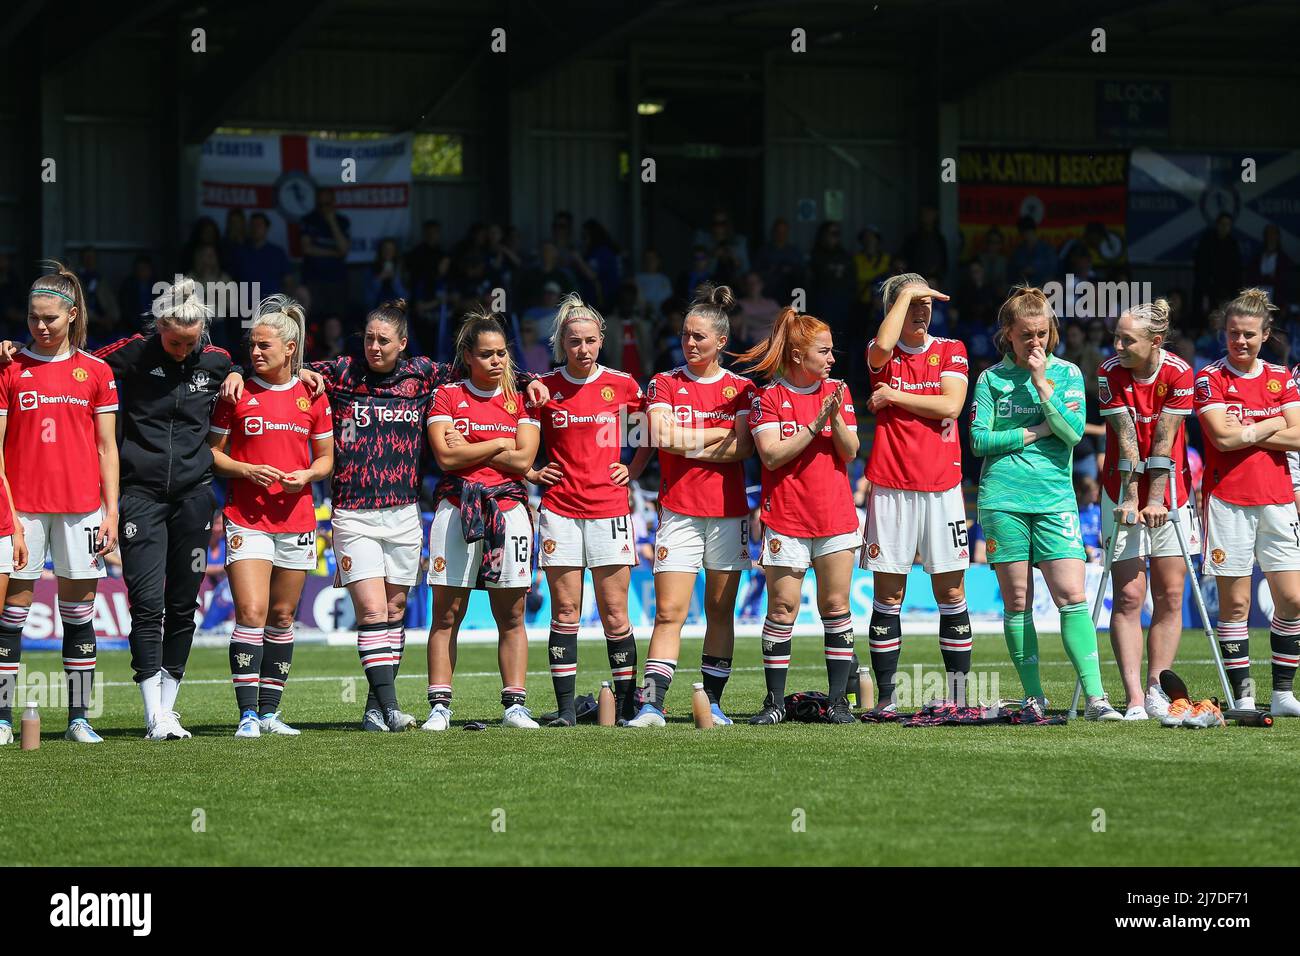 London, England, May 8th 2022: Manchester United at the Final whistle during the FA Barclays Womens Super League game &#xA;between Chelsea and Manchester United at Kingsmeadow in London, England.  Pedro Soares/SPP (Credit Image: © Pedro Soares/Sport Press Photo via ZUMA Press) Stock Photo